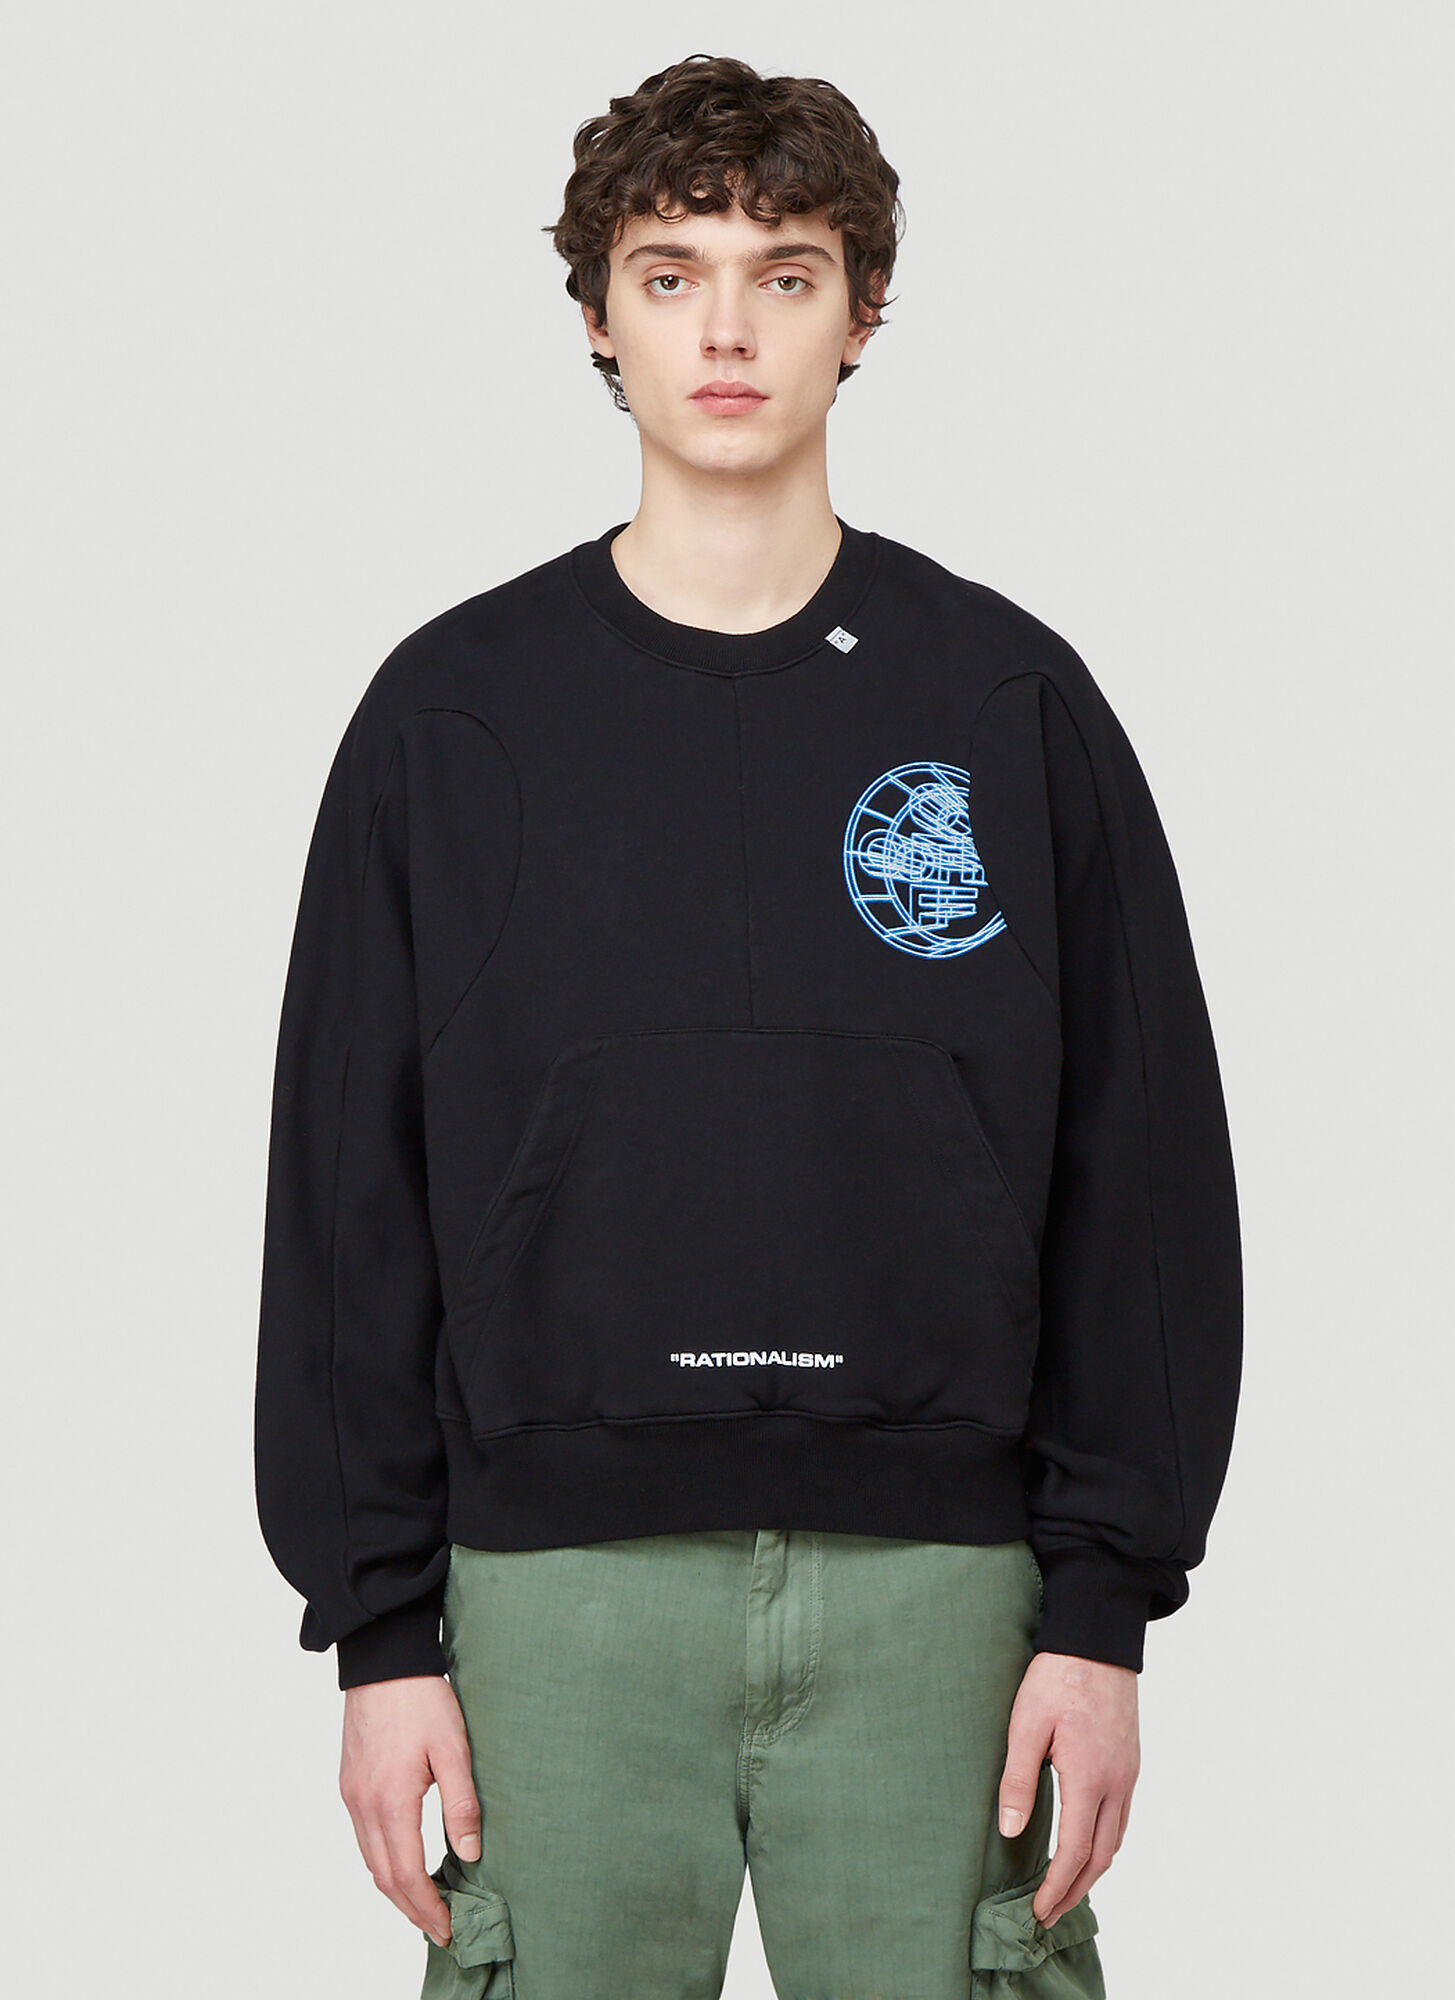 Off-White “Rationalism” Sweatshirt in Black size L | The Fashionisto